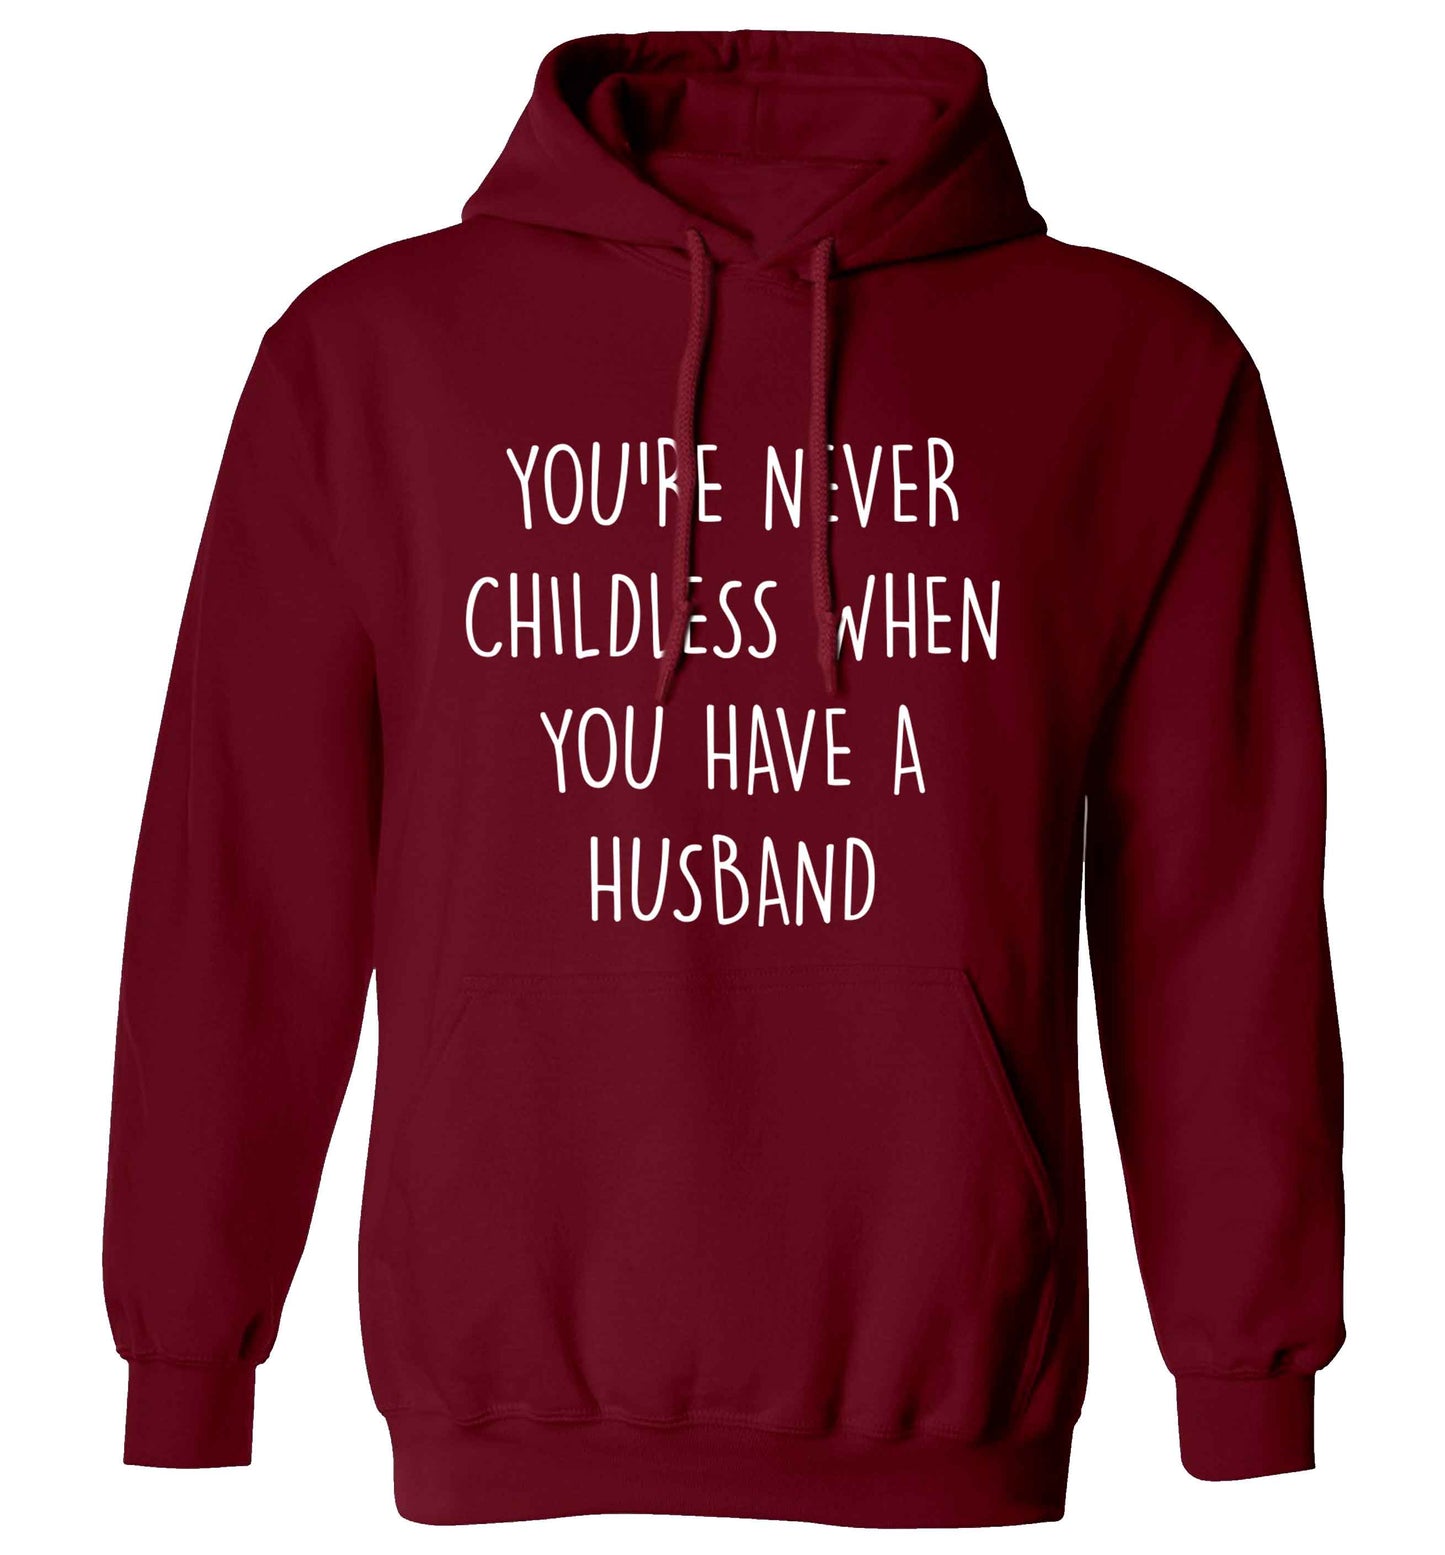 You're never childess when you have a husband adults unisex maroon hoodie 2XL